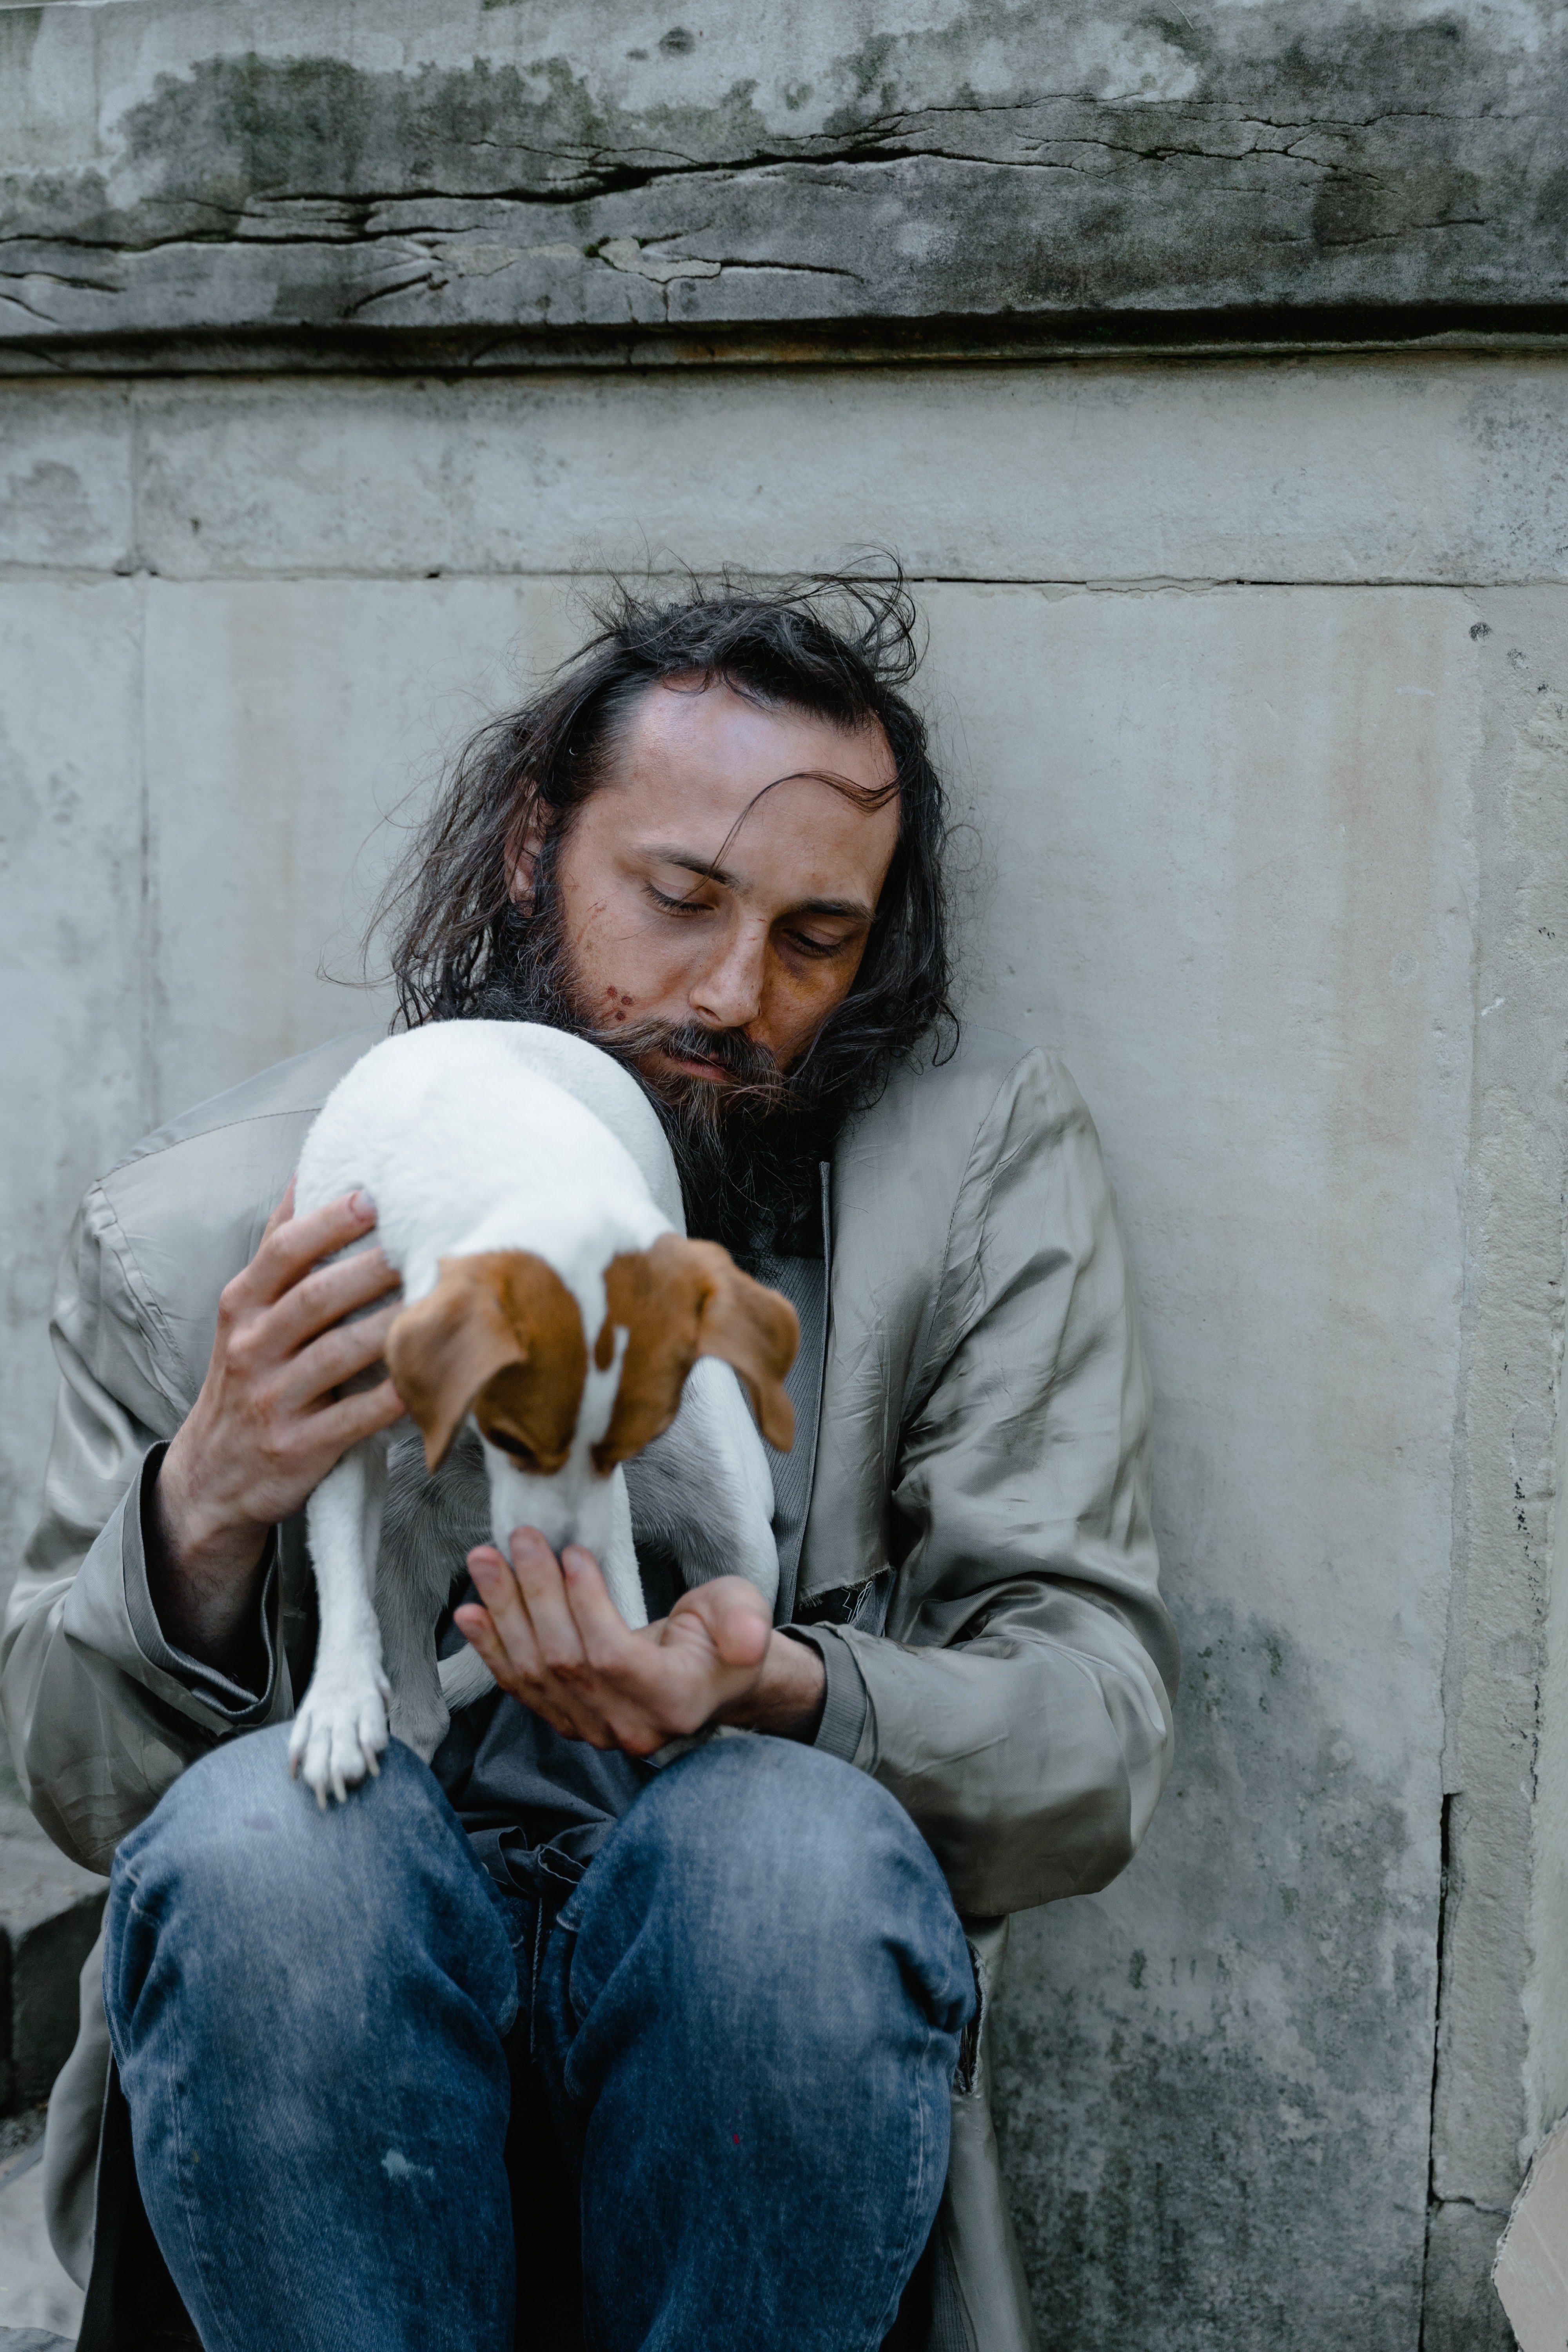 The homeless man split the snack into two and handed one half to the dog | Source: Pexels